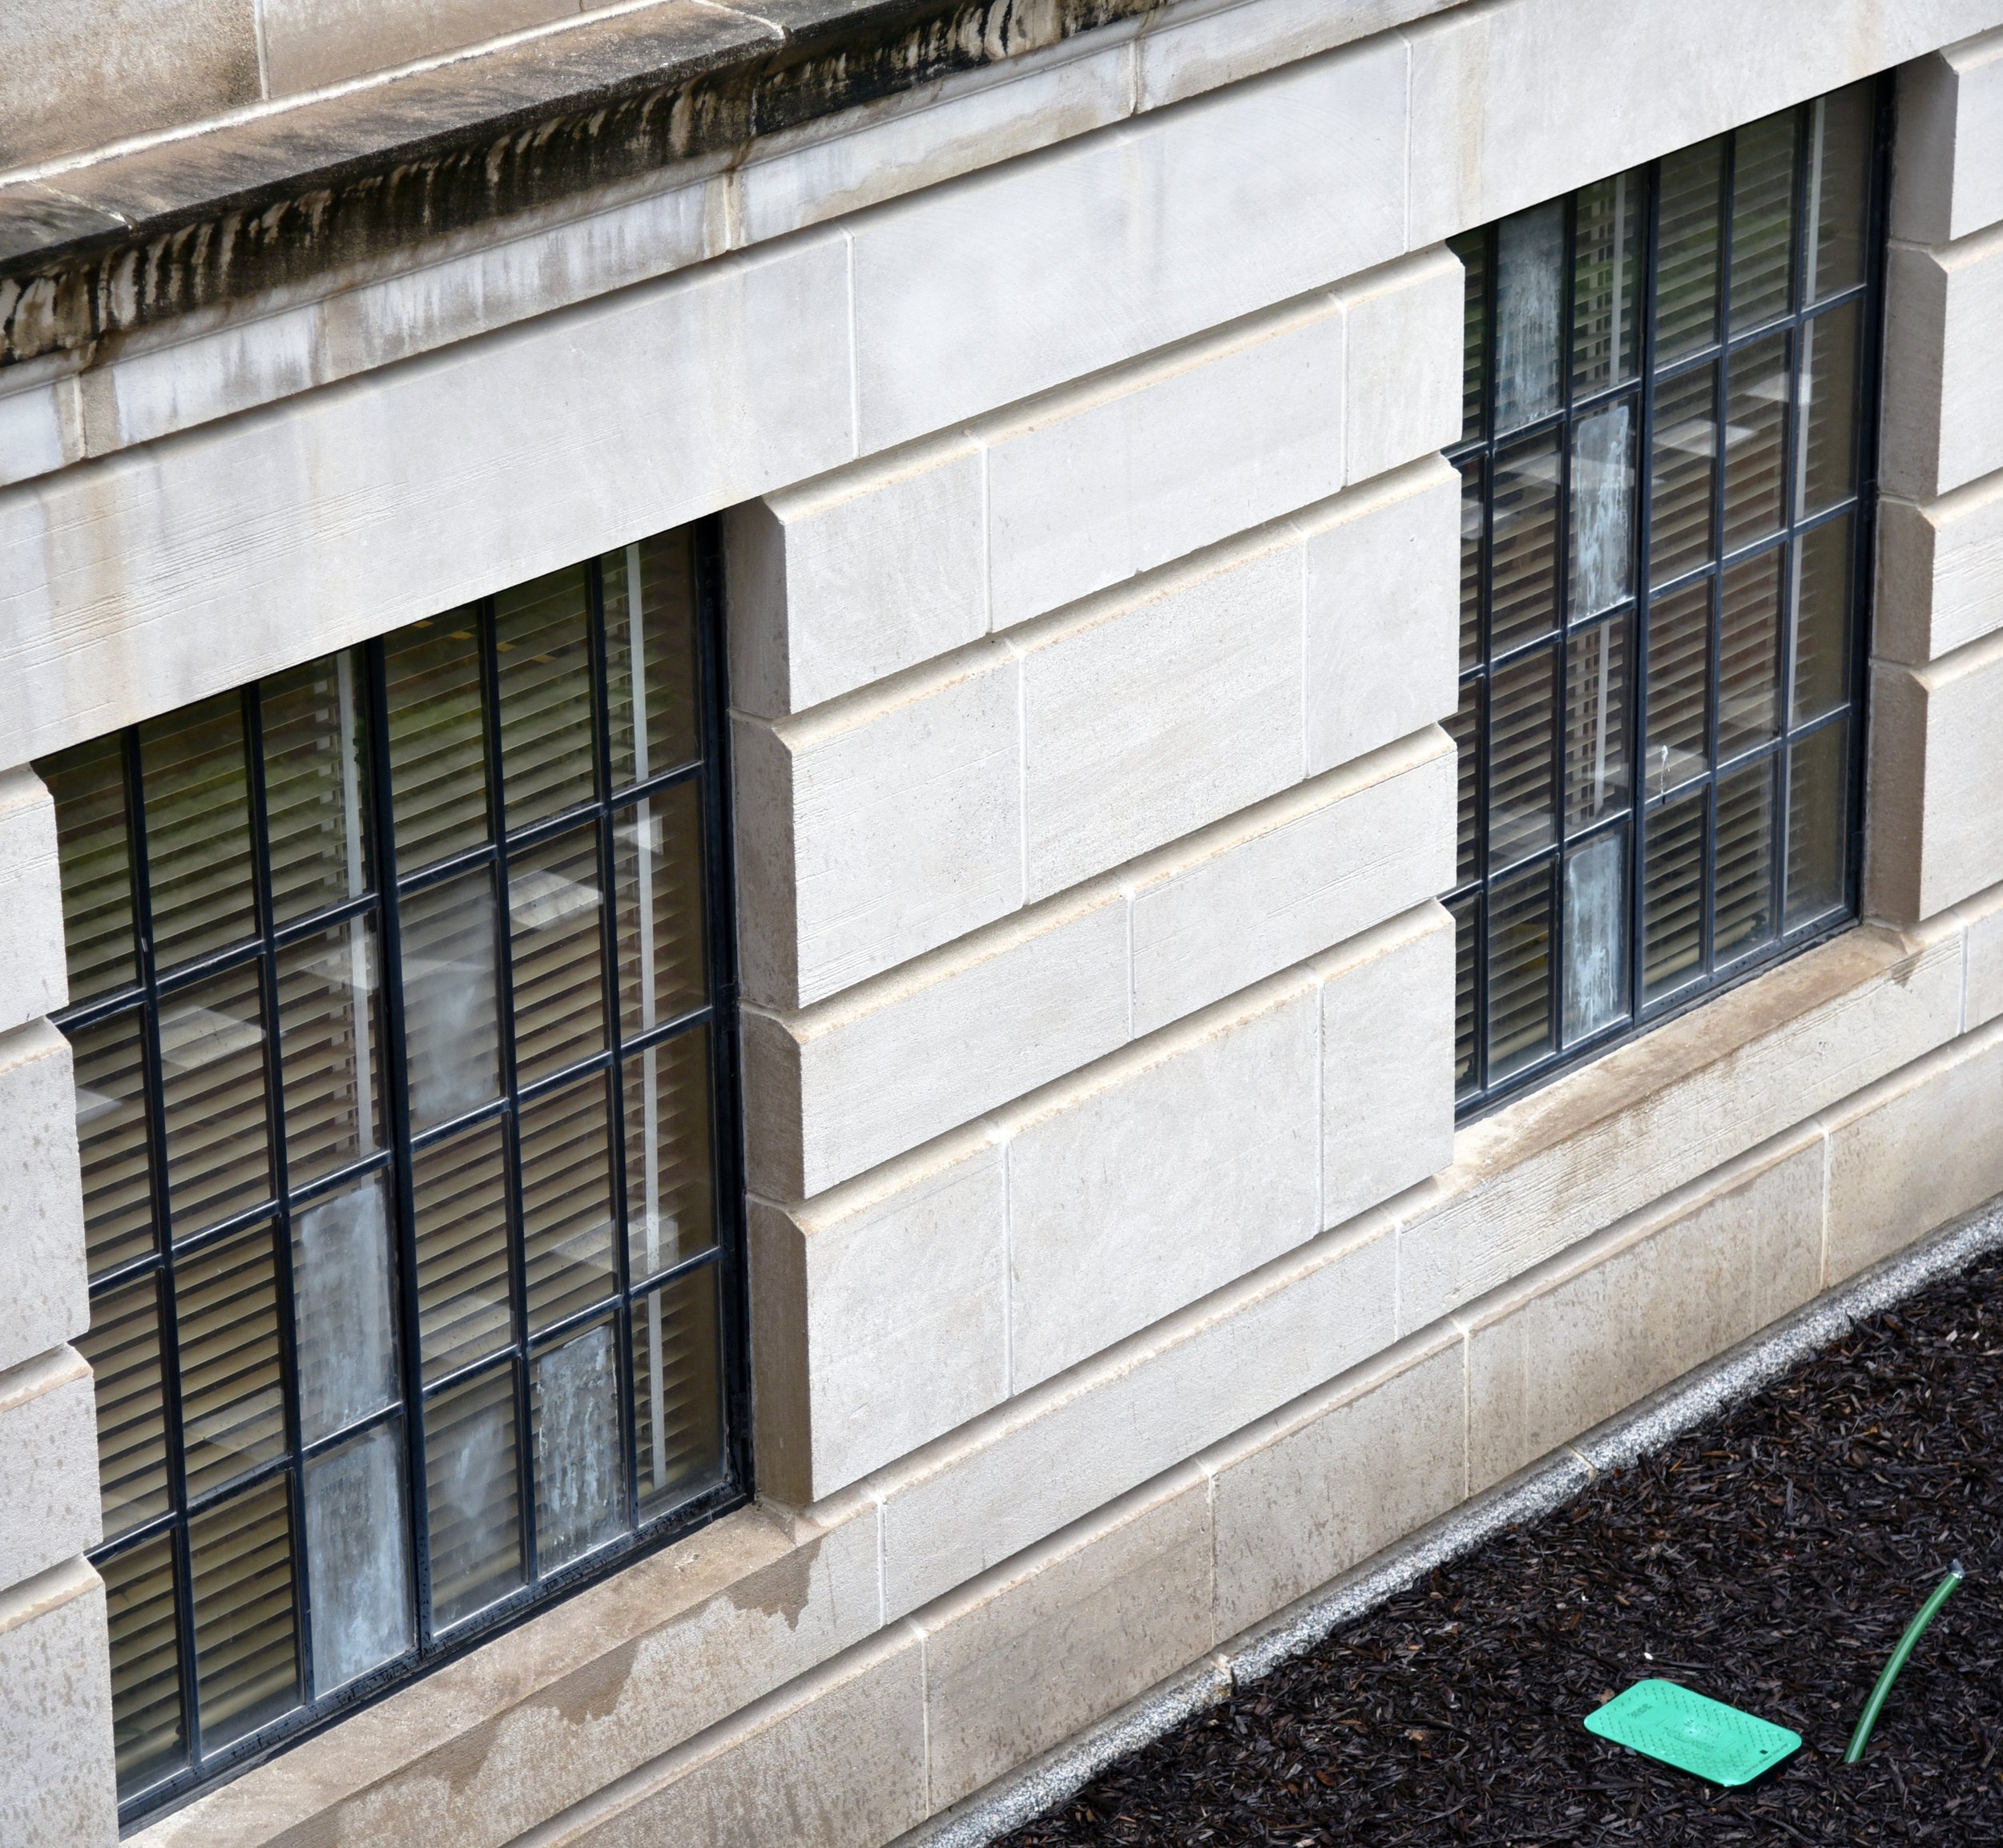  Due to numerous failed thermopane glass seals, as seen here on windows in a Capitol courtyard, the original window frames are being carefully restored, weather-sealed, and refurbished with single-pane glass. 